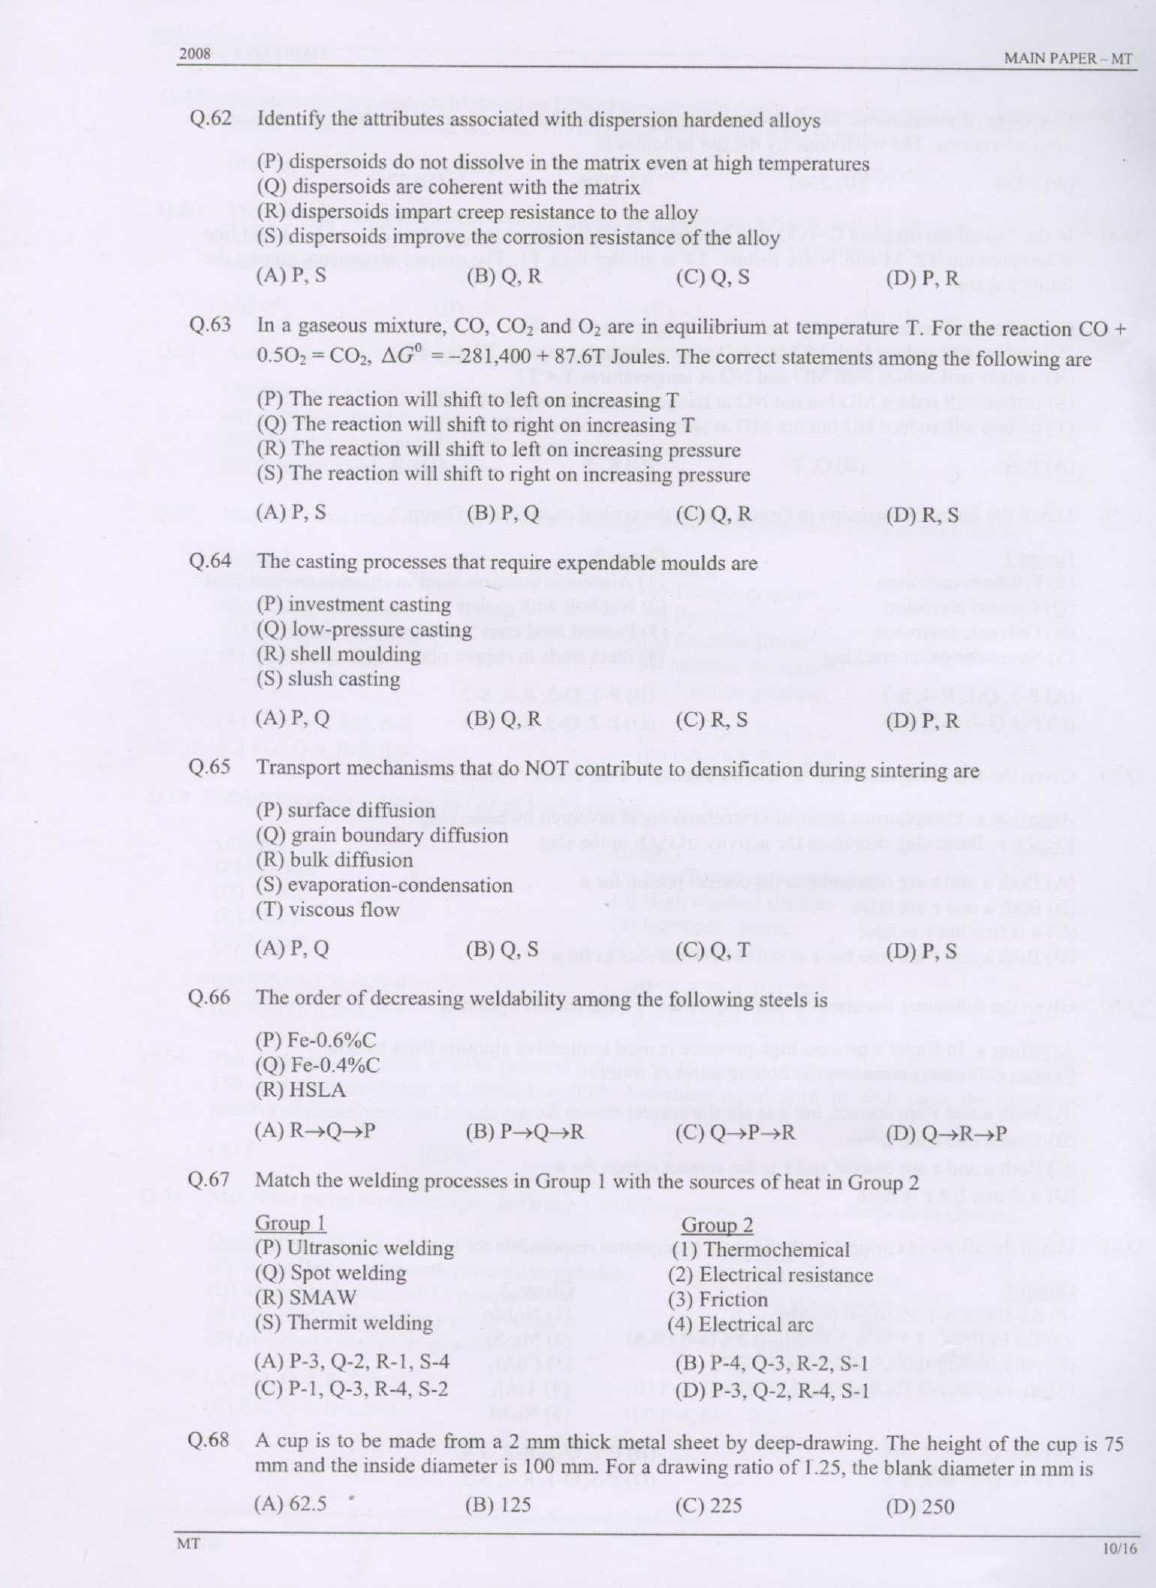 GATE Exam Question Paper 2008 Metallurgical Engineering 10